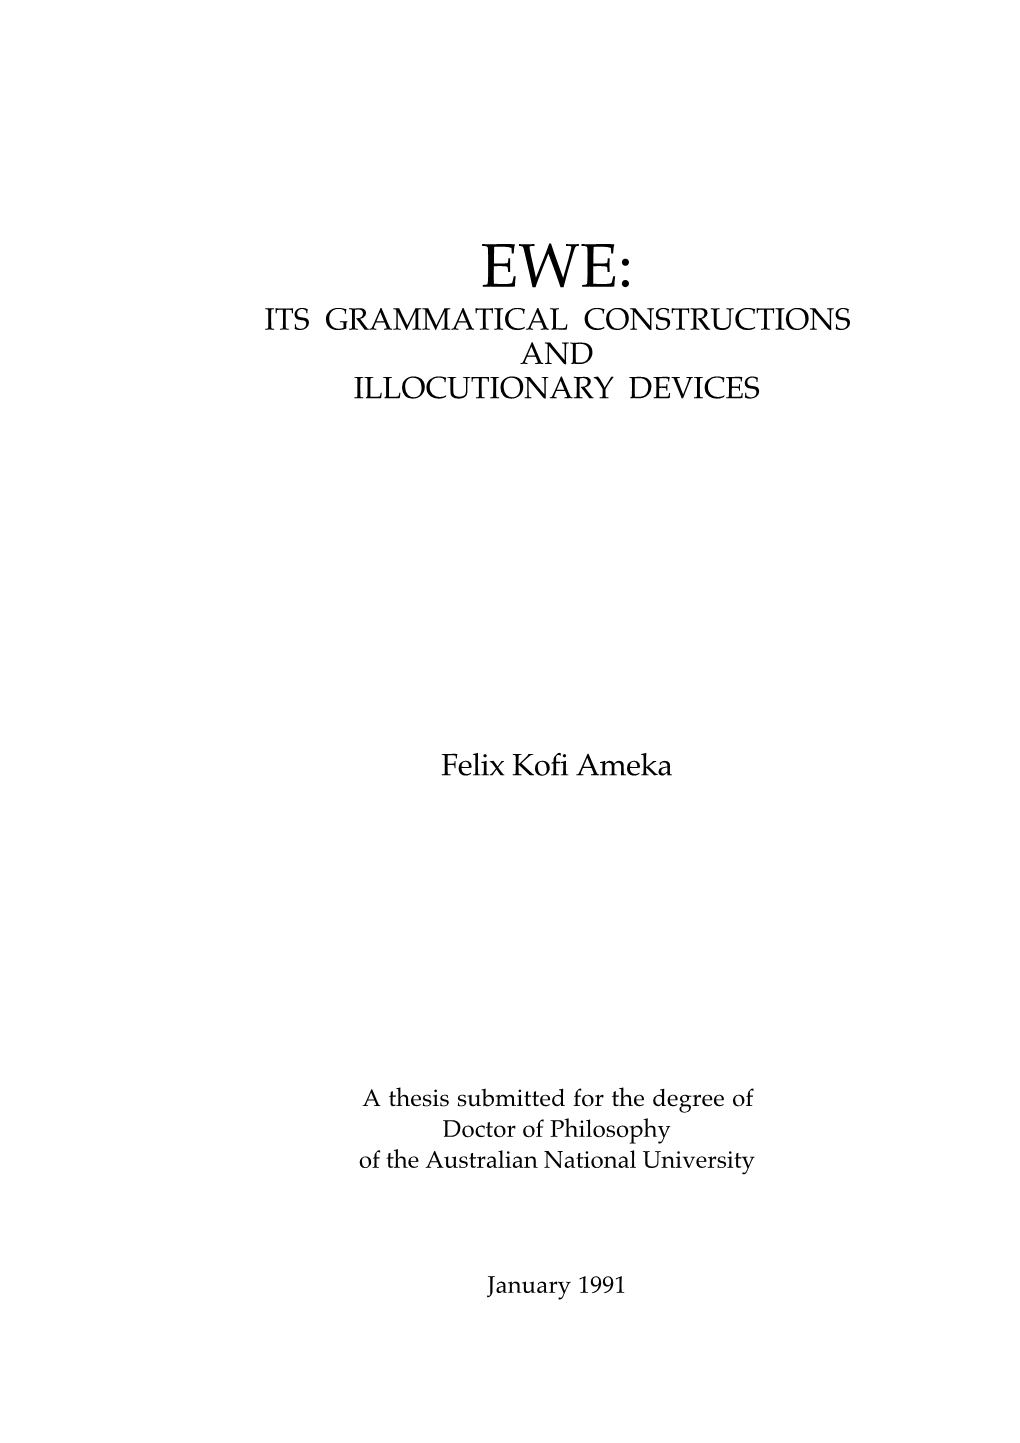 Its Grammatical Constructions and Illocutionary Devices